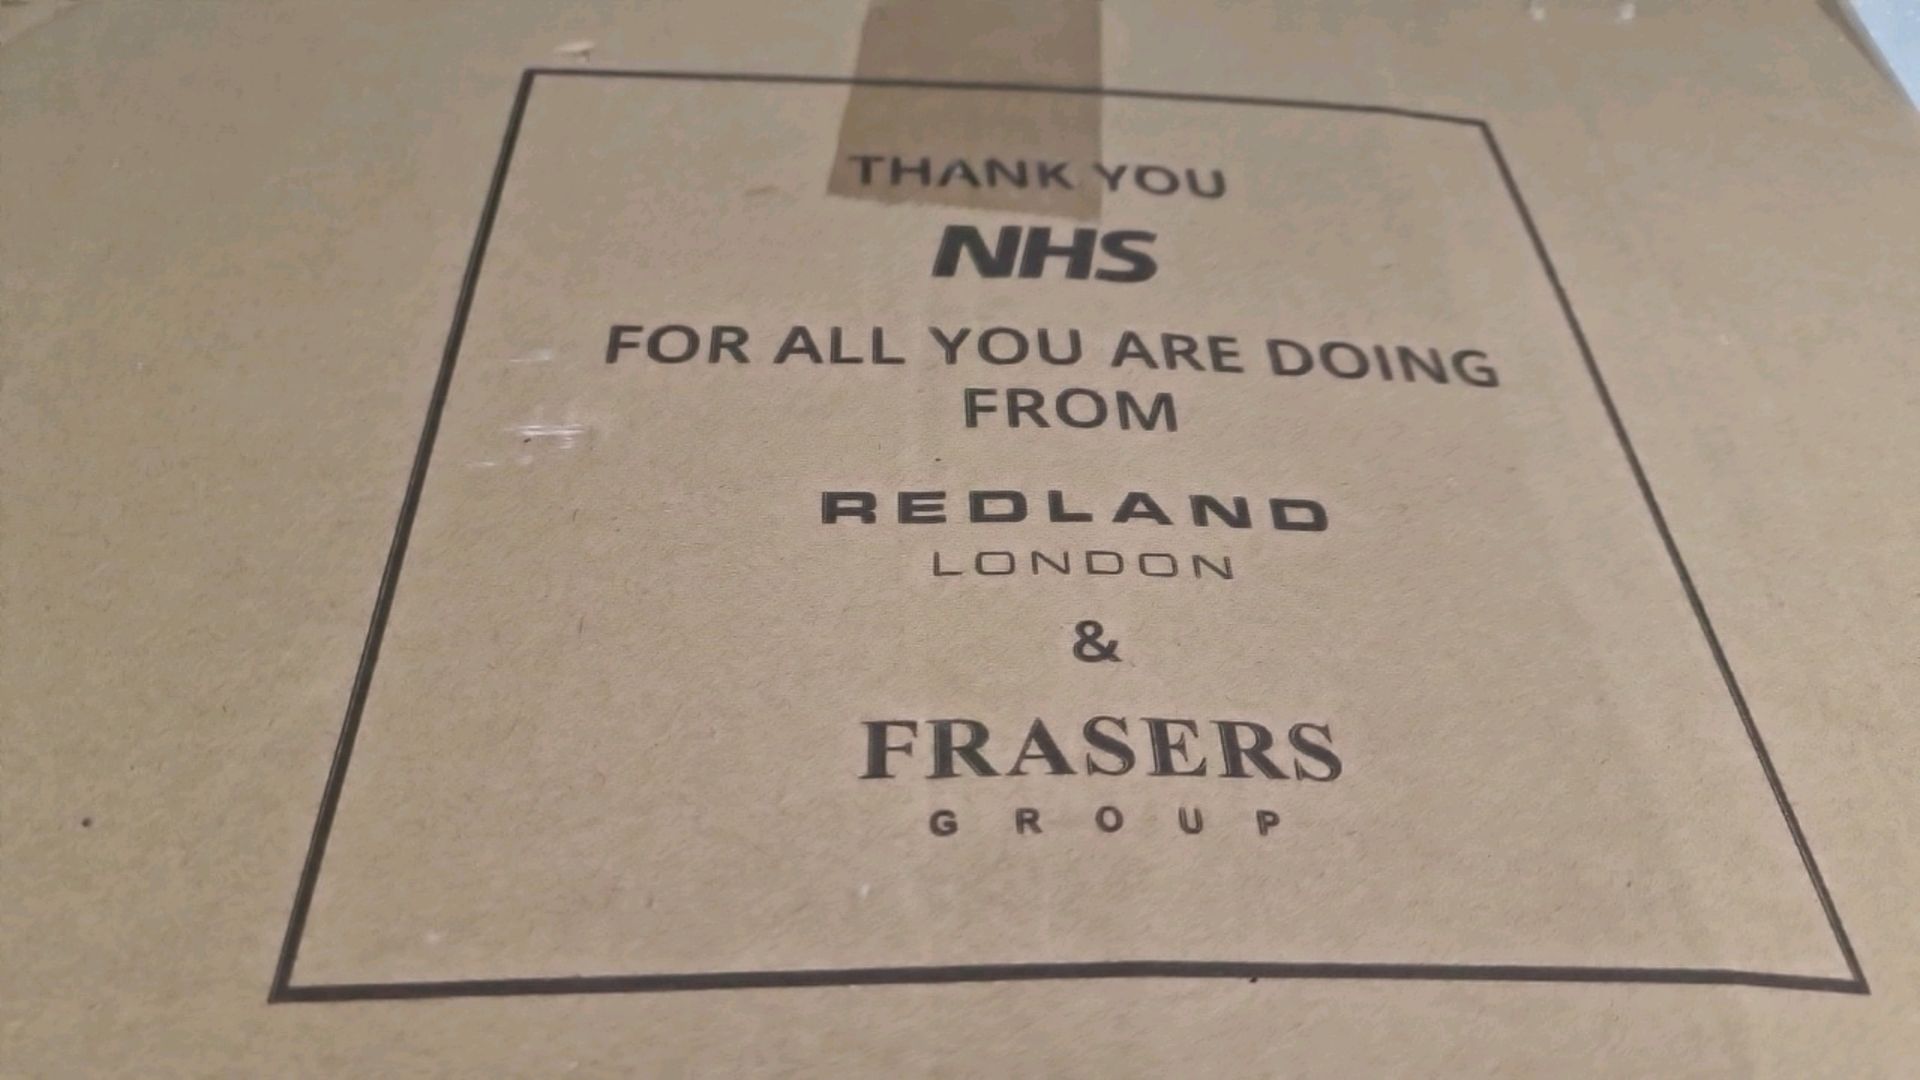 NHS Covid Care Package - Image 2 of 7